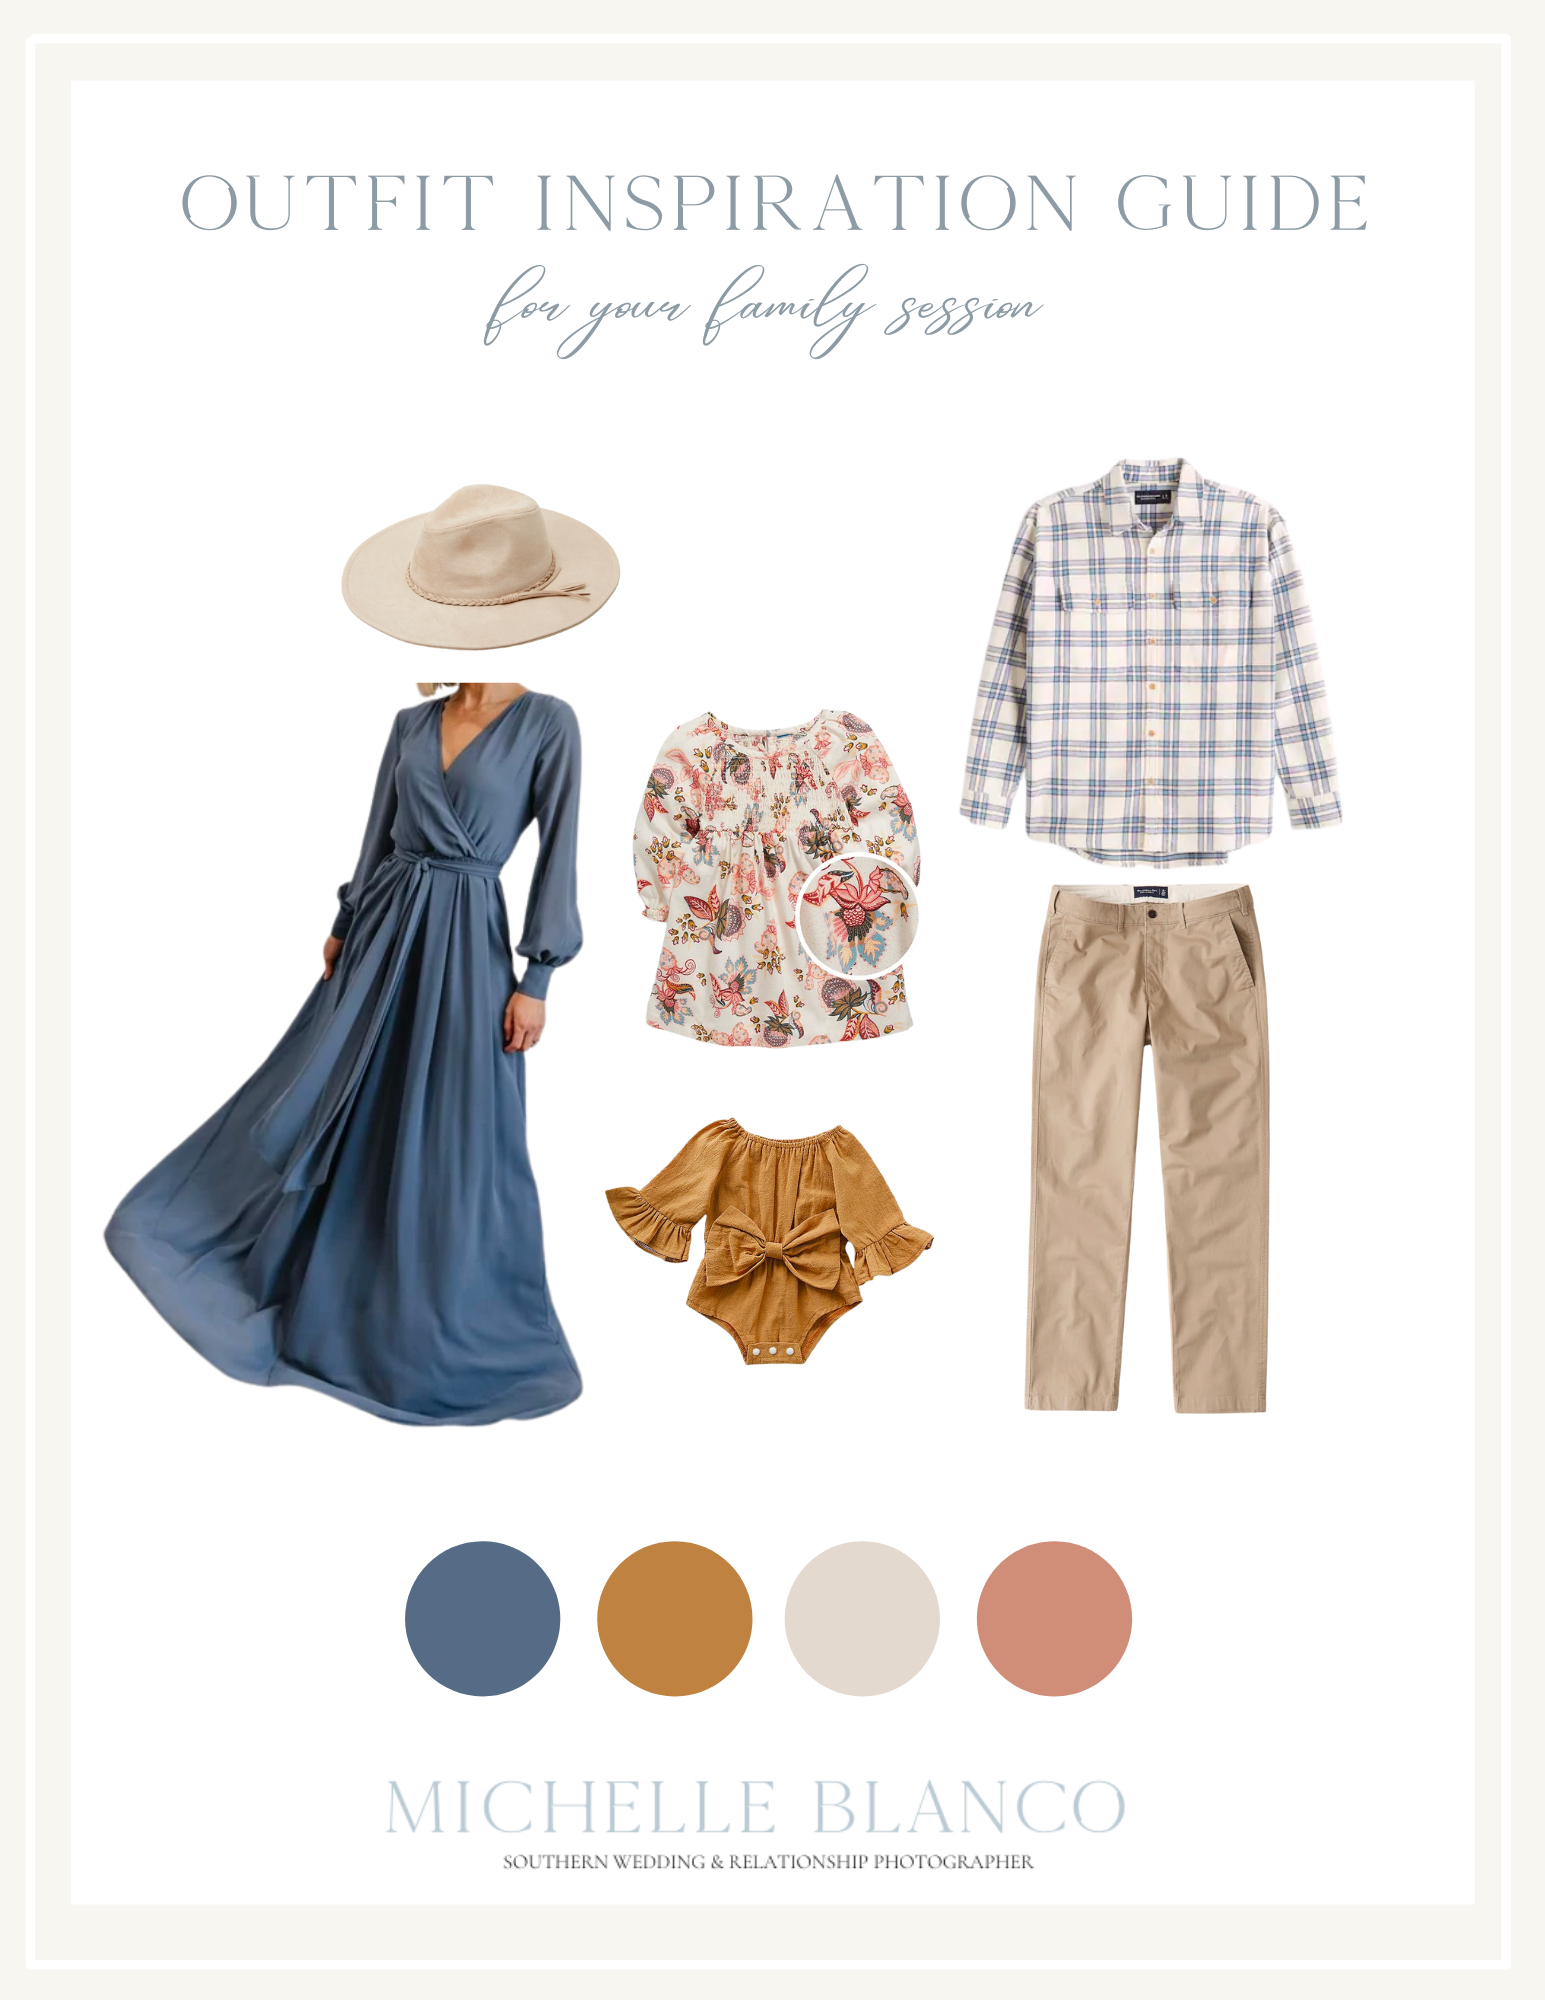 What to wear for fall family photos